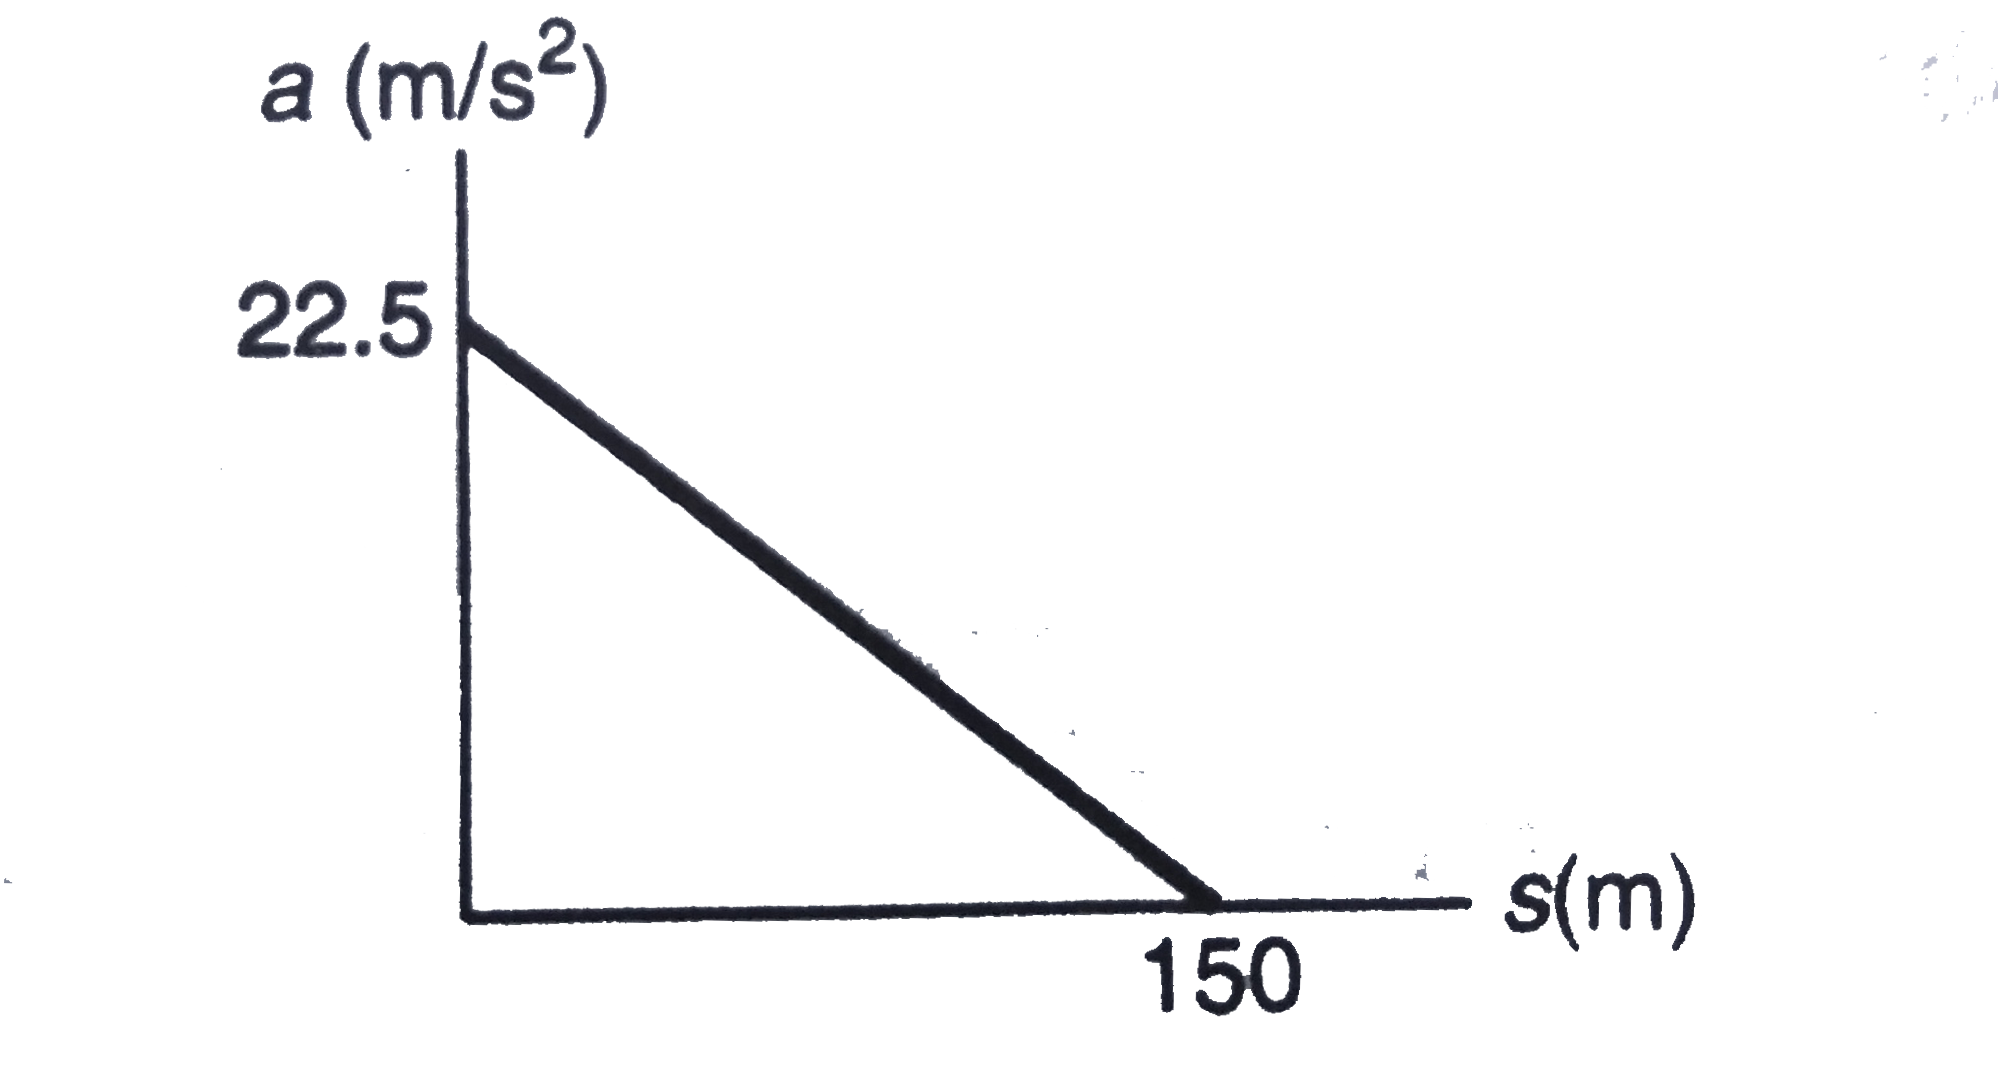 The jet plane starts from rest at s =0 and is subjected to the acceleration shown. Determine the speed of the plane when it has travelled 60 m.